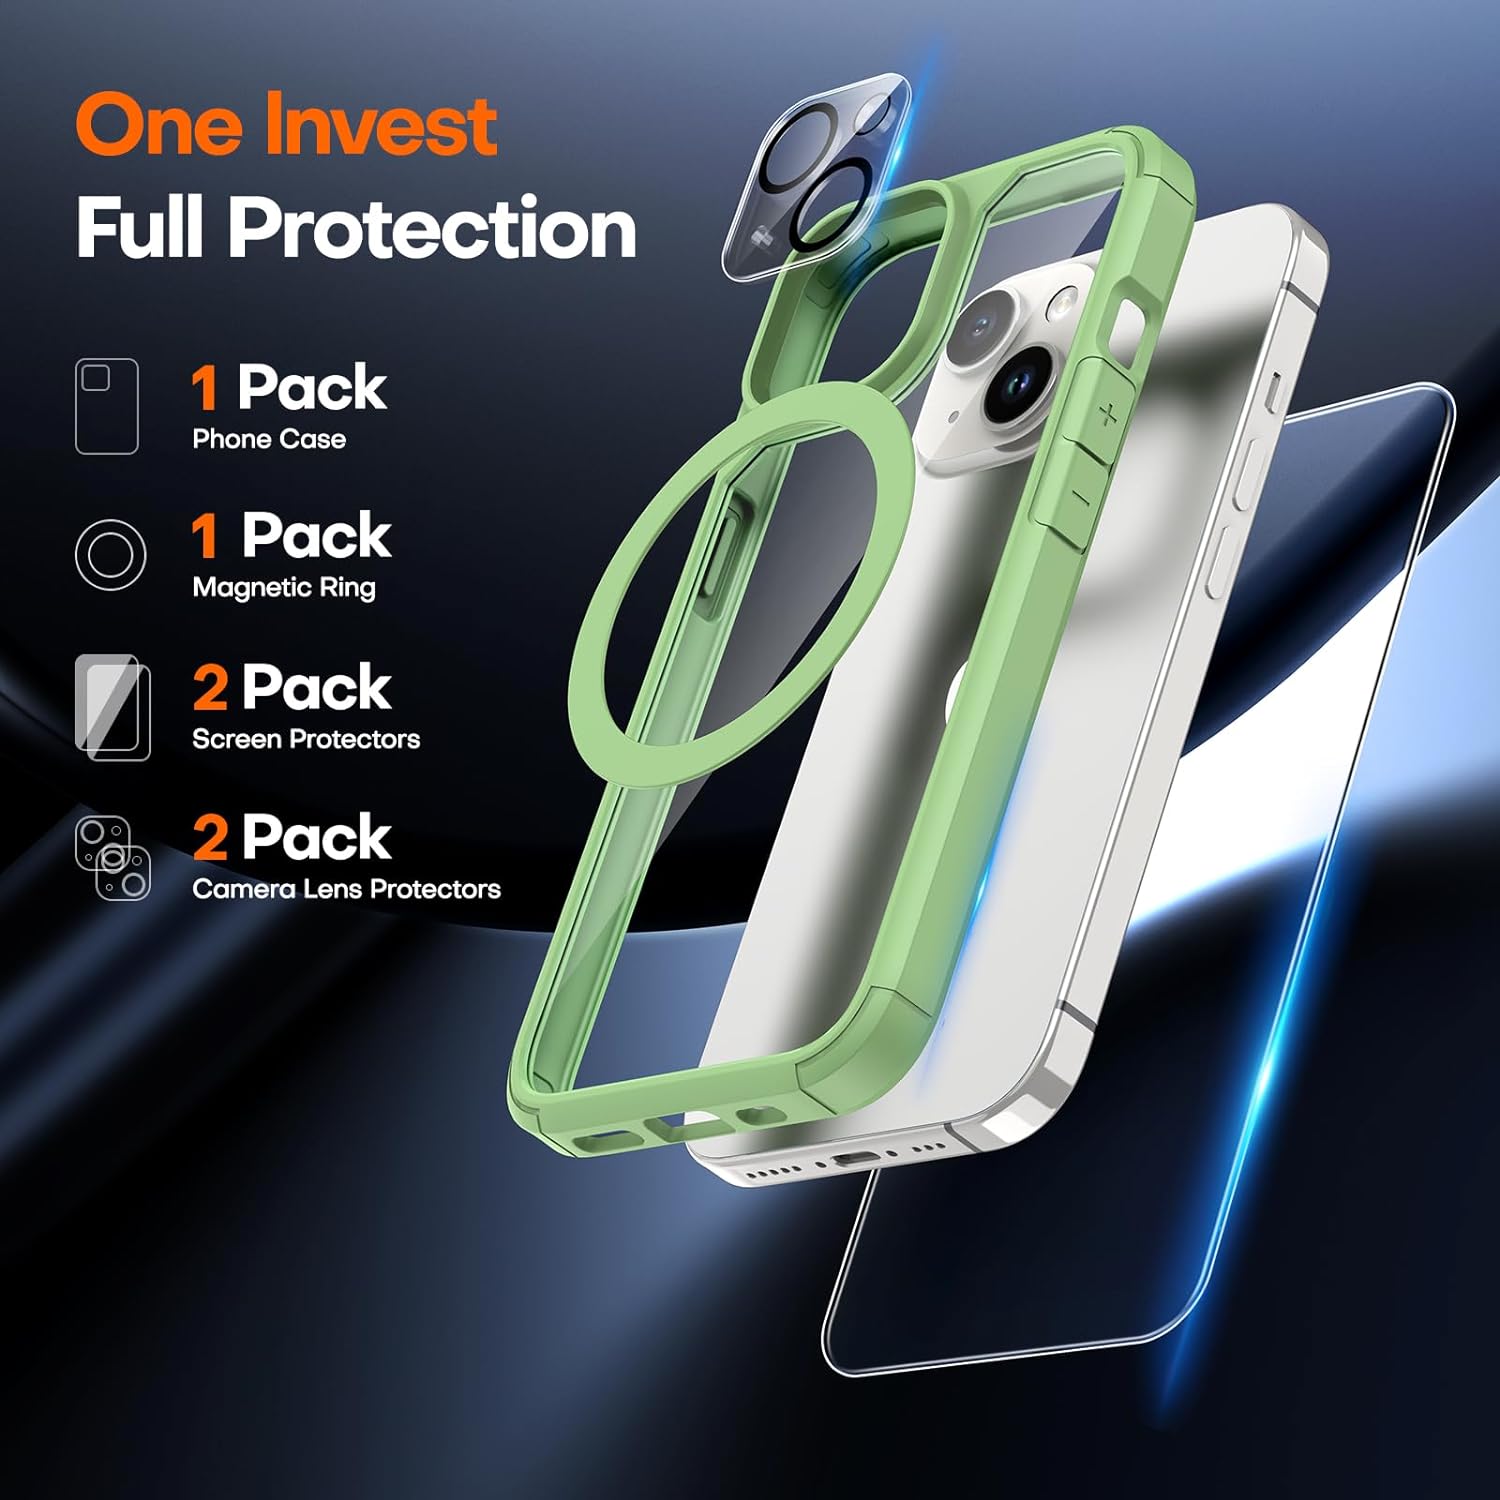 TAURI 5 in 1 for iPhone 15 Case, [Not-Yellowing] with 2X Screen Protectors + 2X Camera Lens Protectors, [Military Grade Drop Protection] Shockproof Slim Phone Case for iPhone 15, Light Green